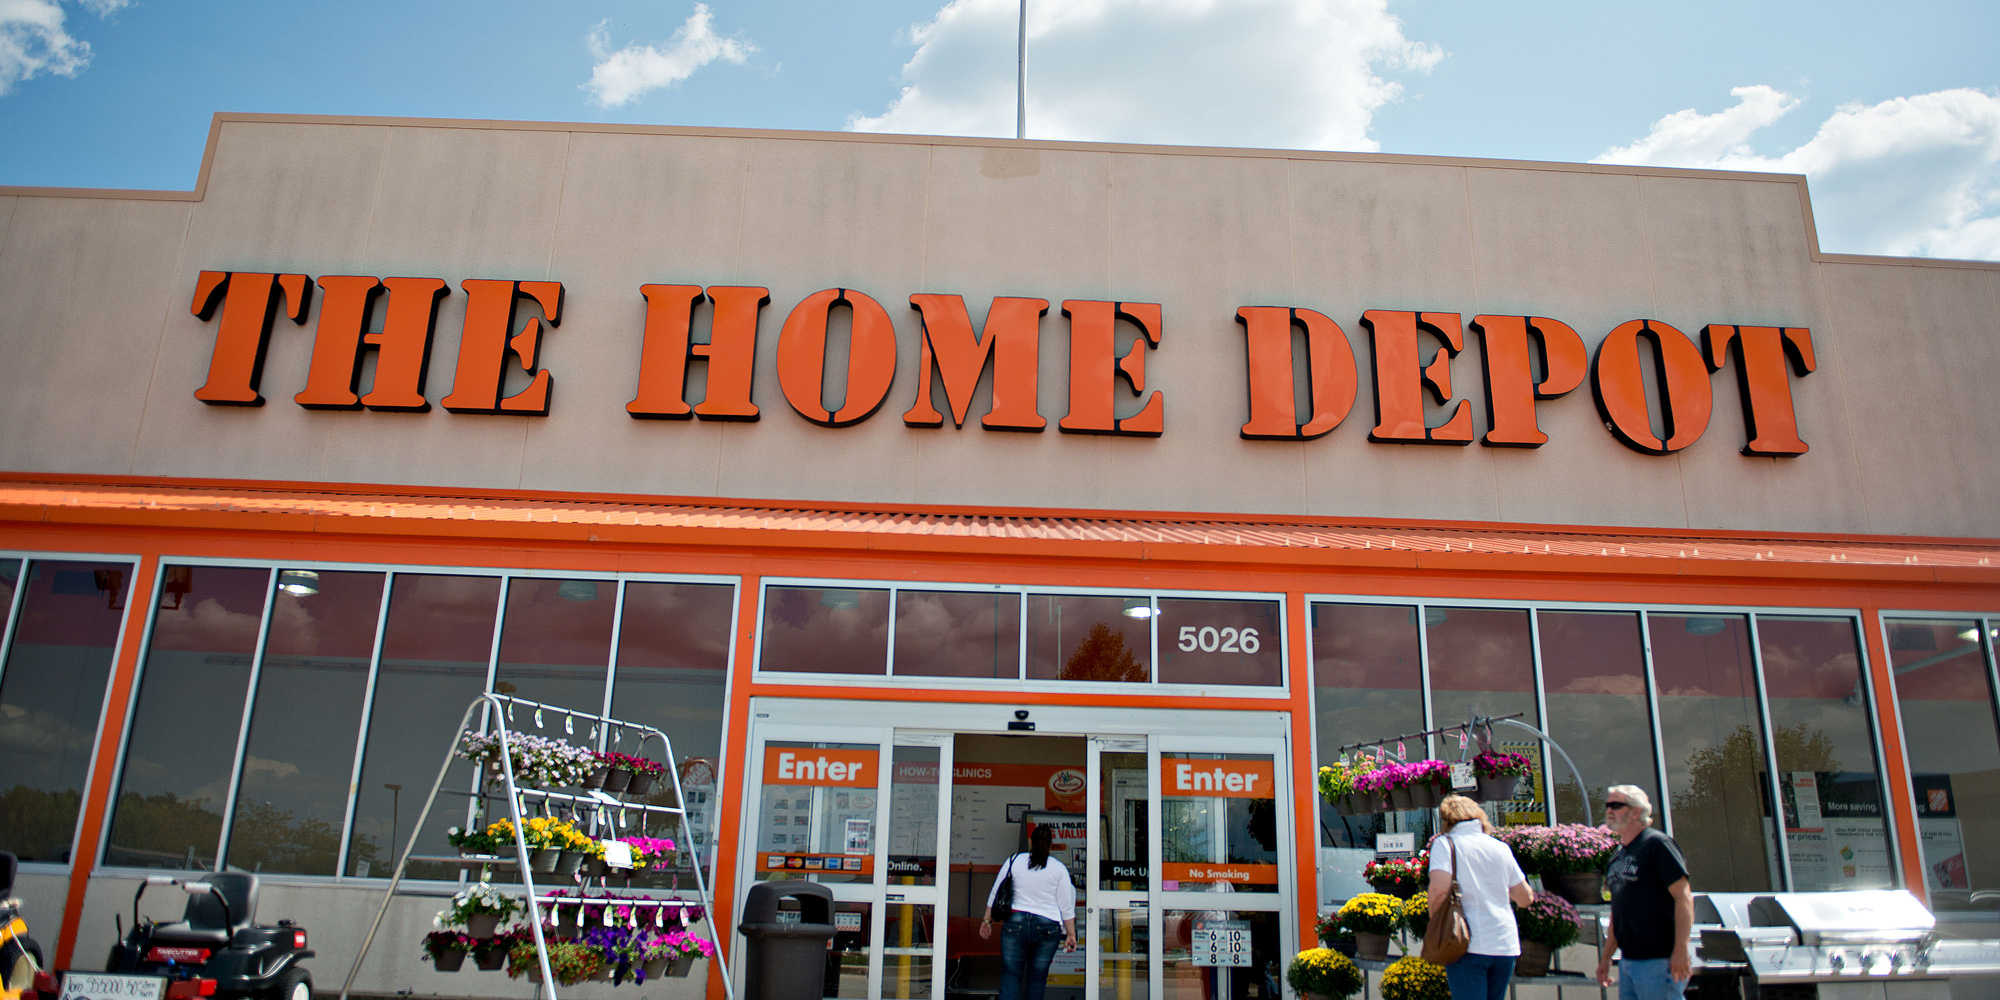 Home Depot just partnered with the American Cannabis Company